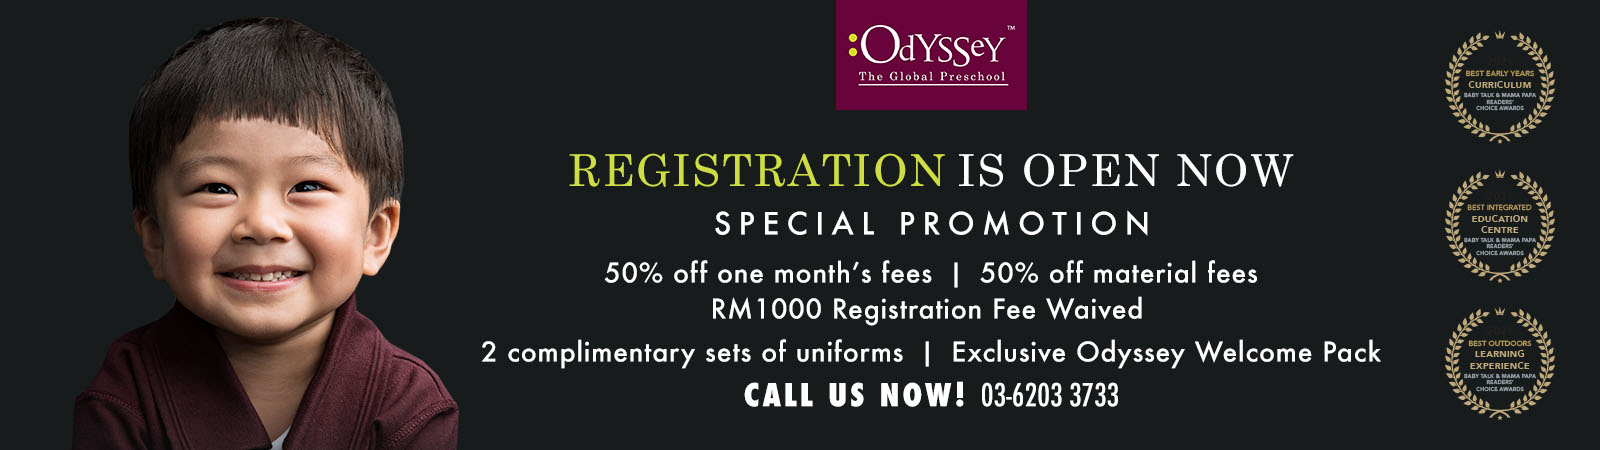 Odyssey The Global Preschool Integrated Education Centre: Your child is always the focus